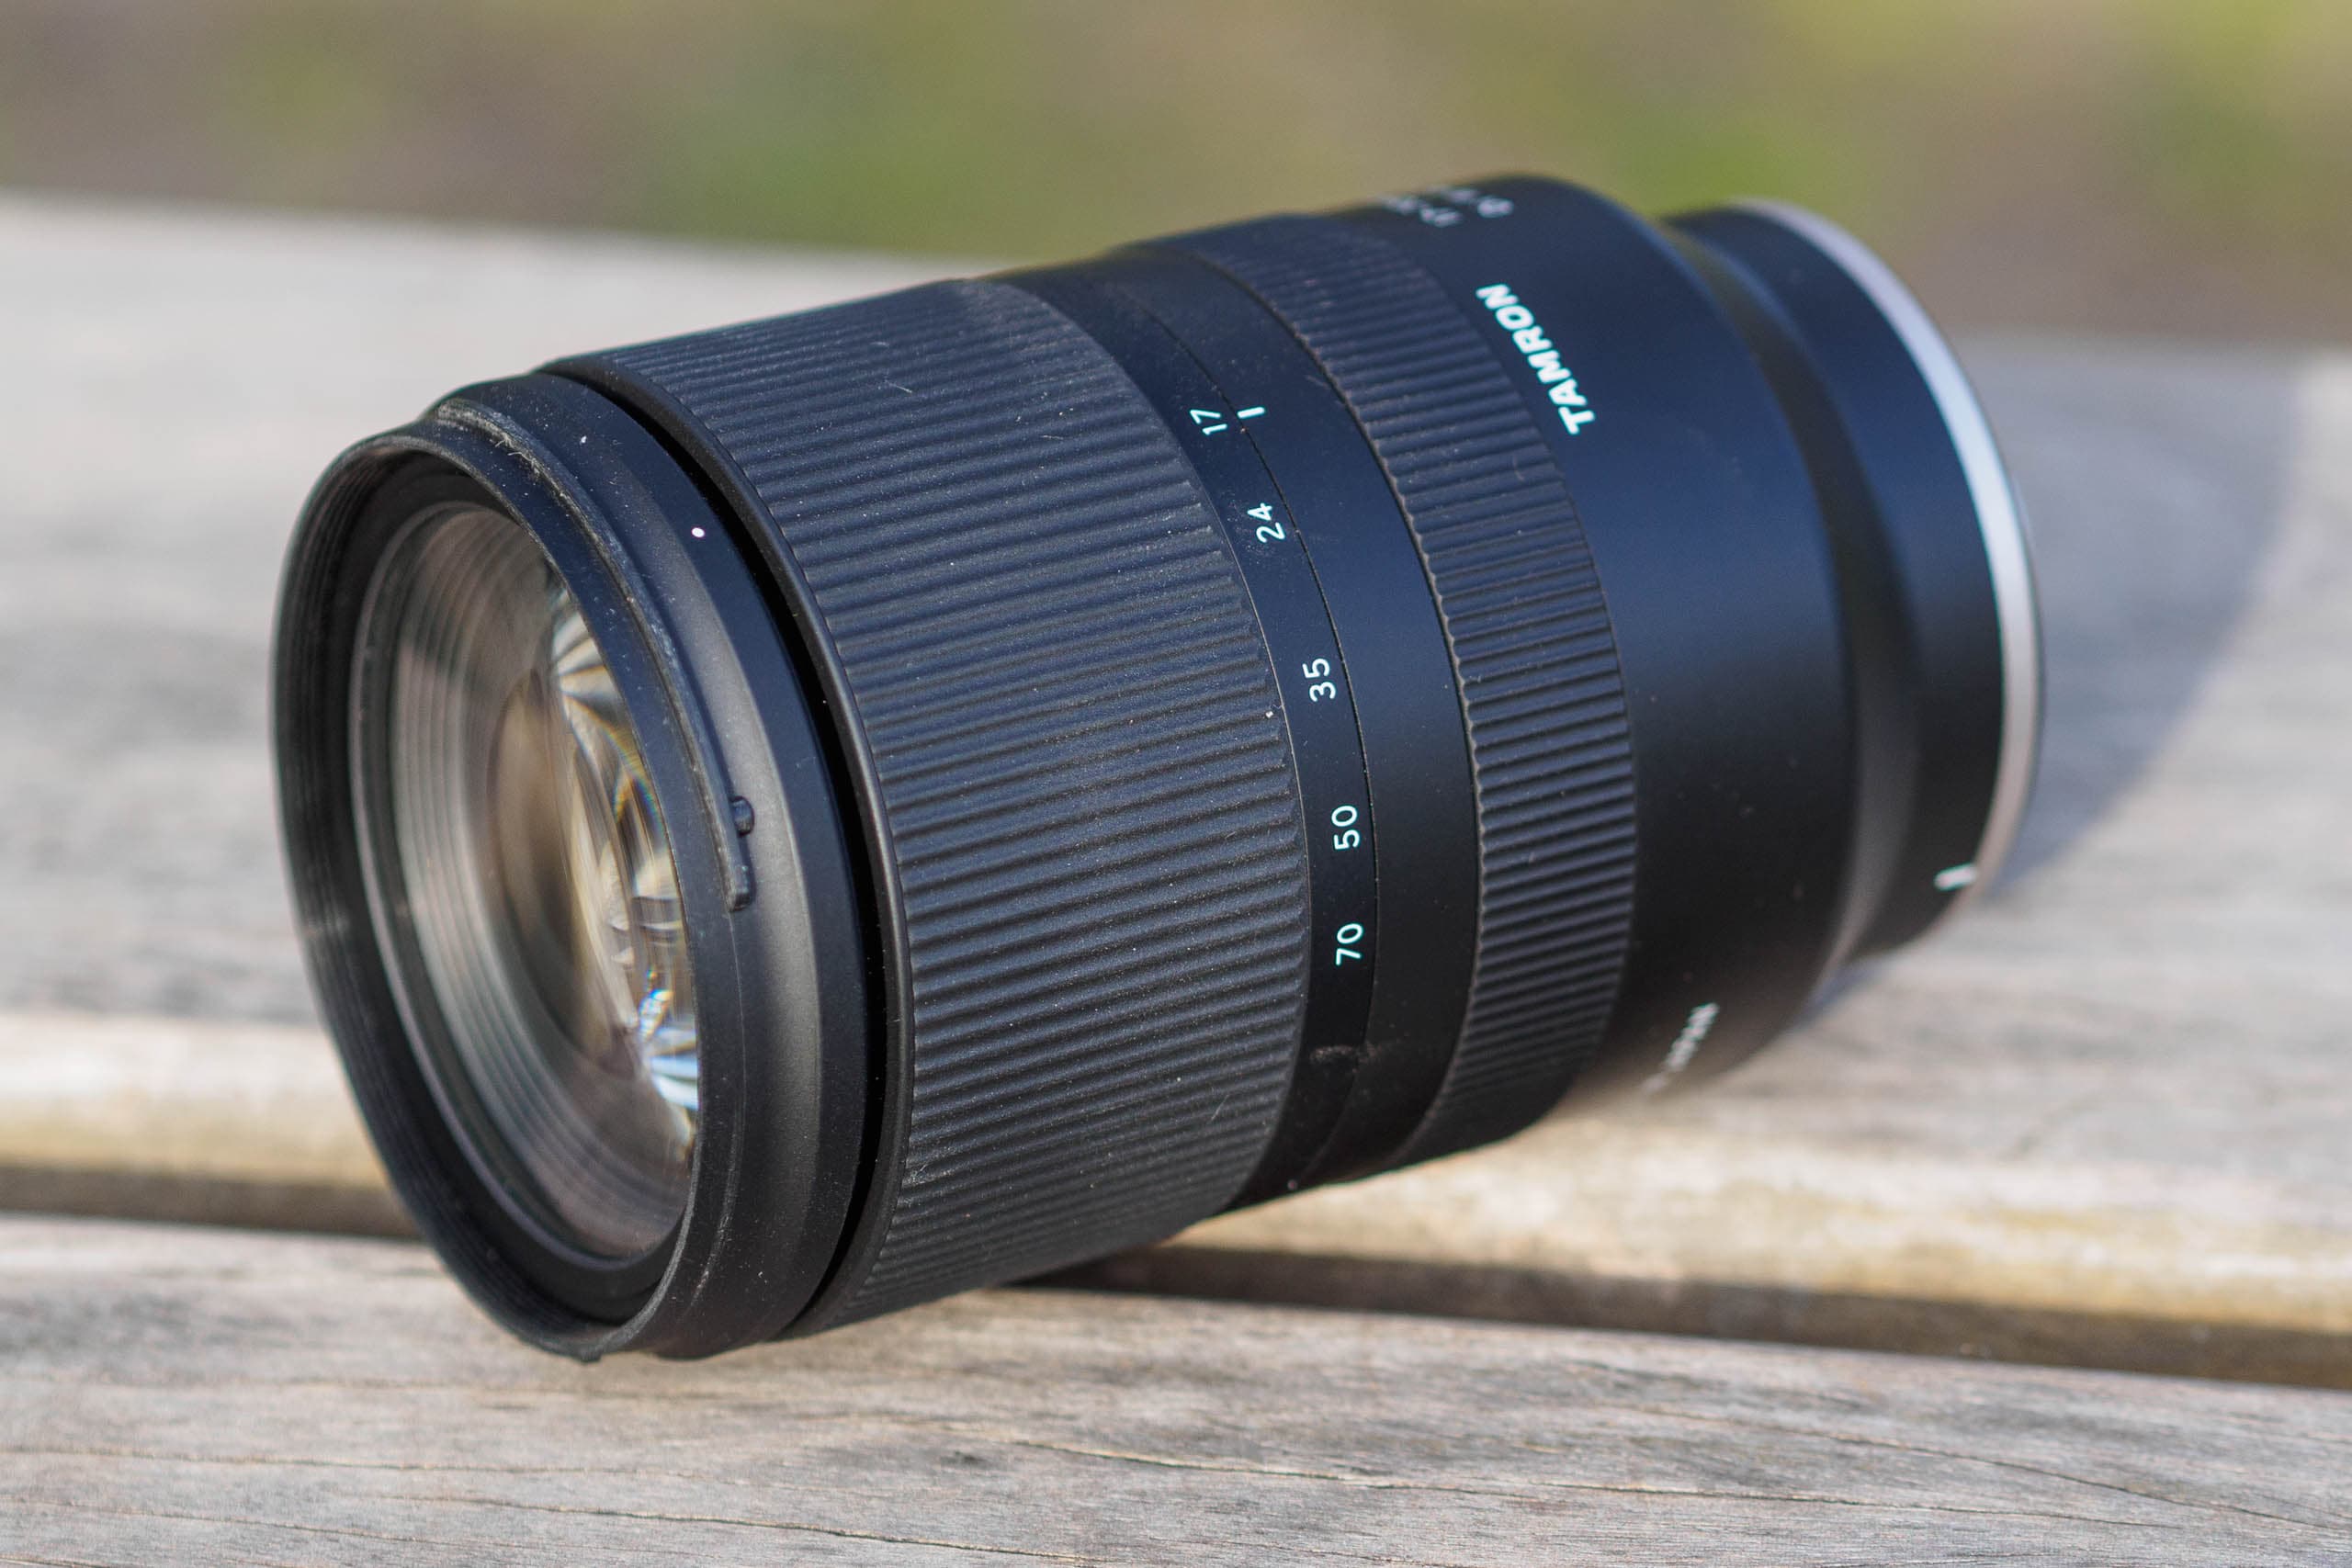 Tamron 17-70 F2.8 Di III-A VC RXD field review: Digital Photography Review